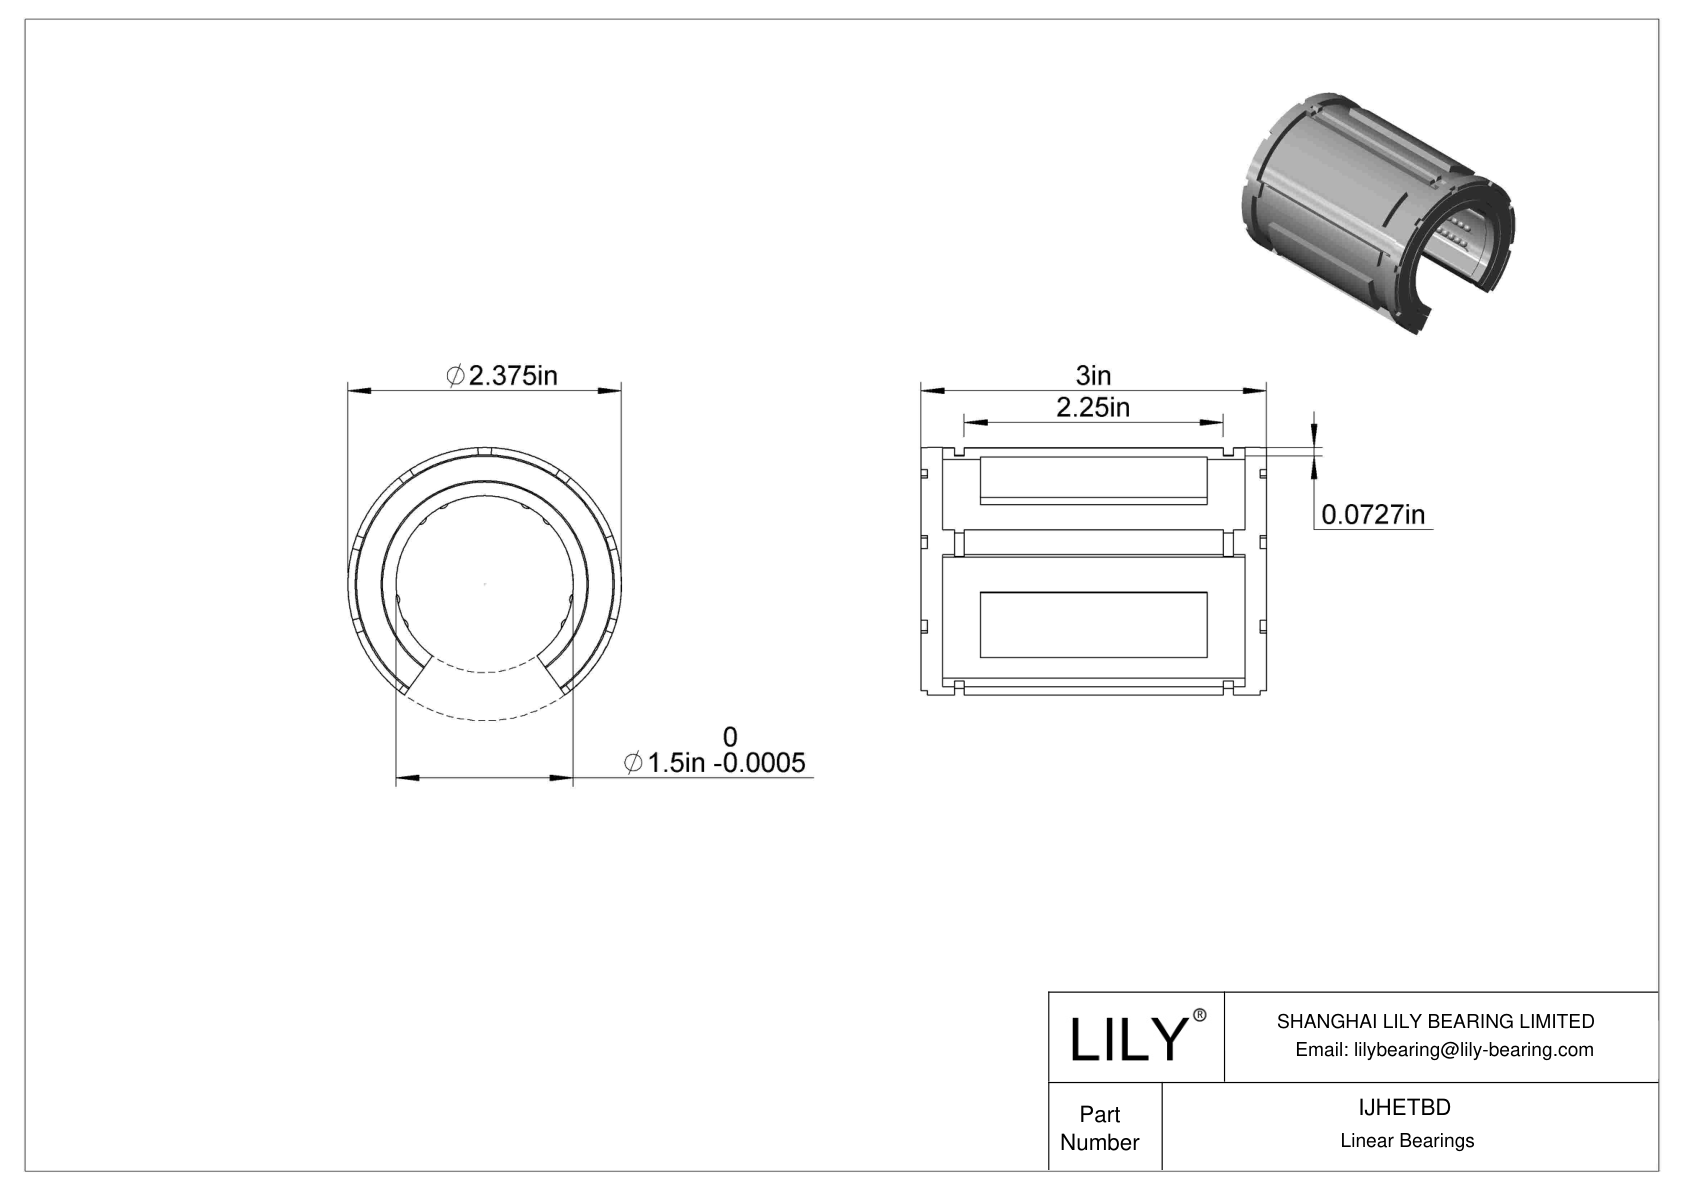 IJHETBD Common Linear Ball Bearings for Support Rail Shafts cad drawing